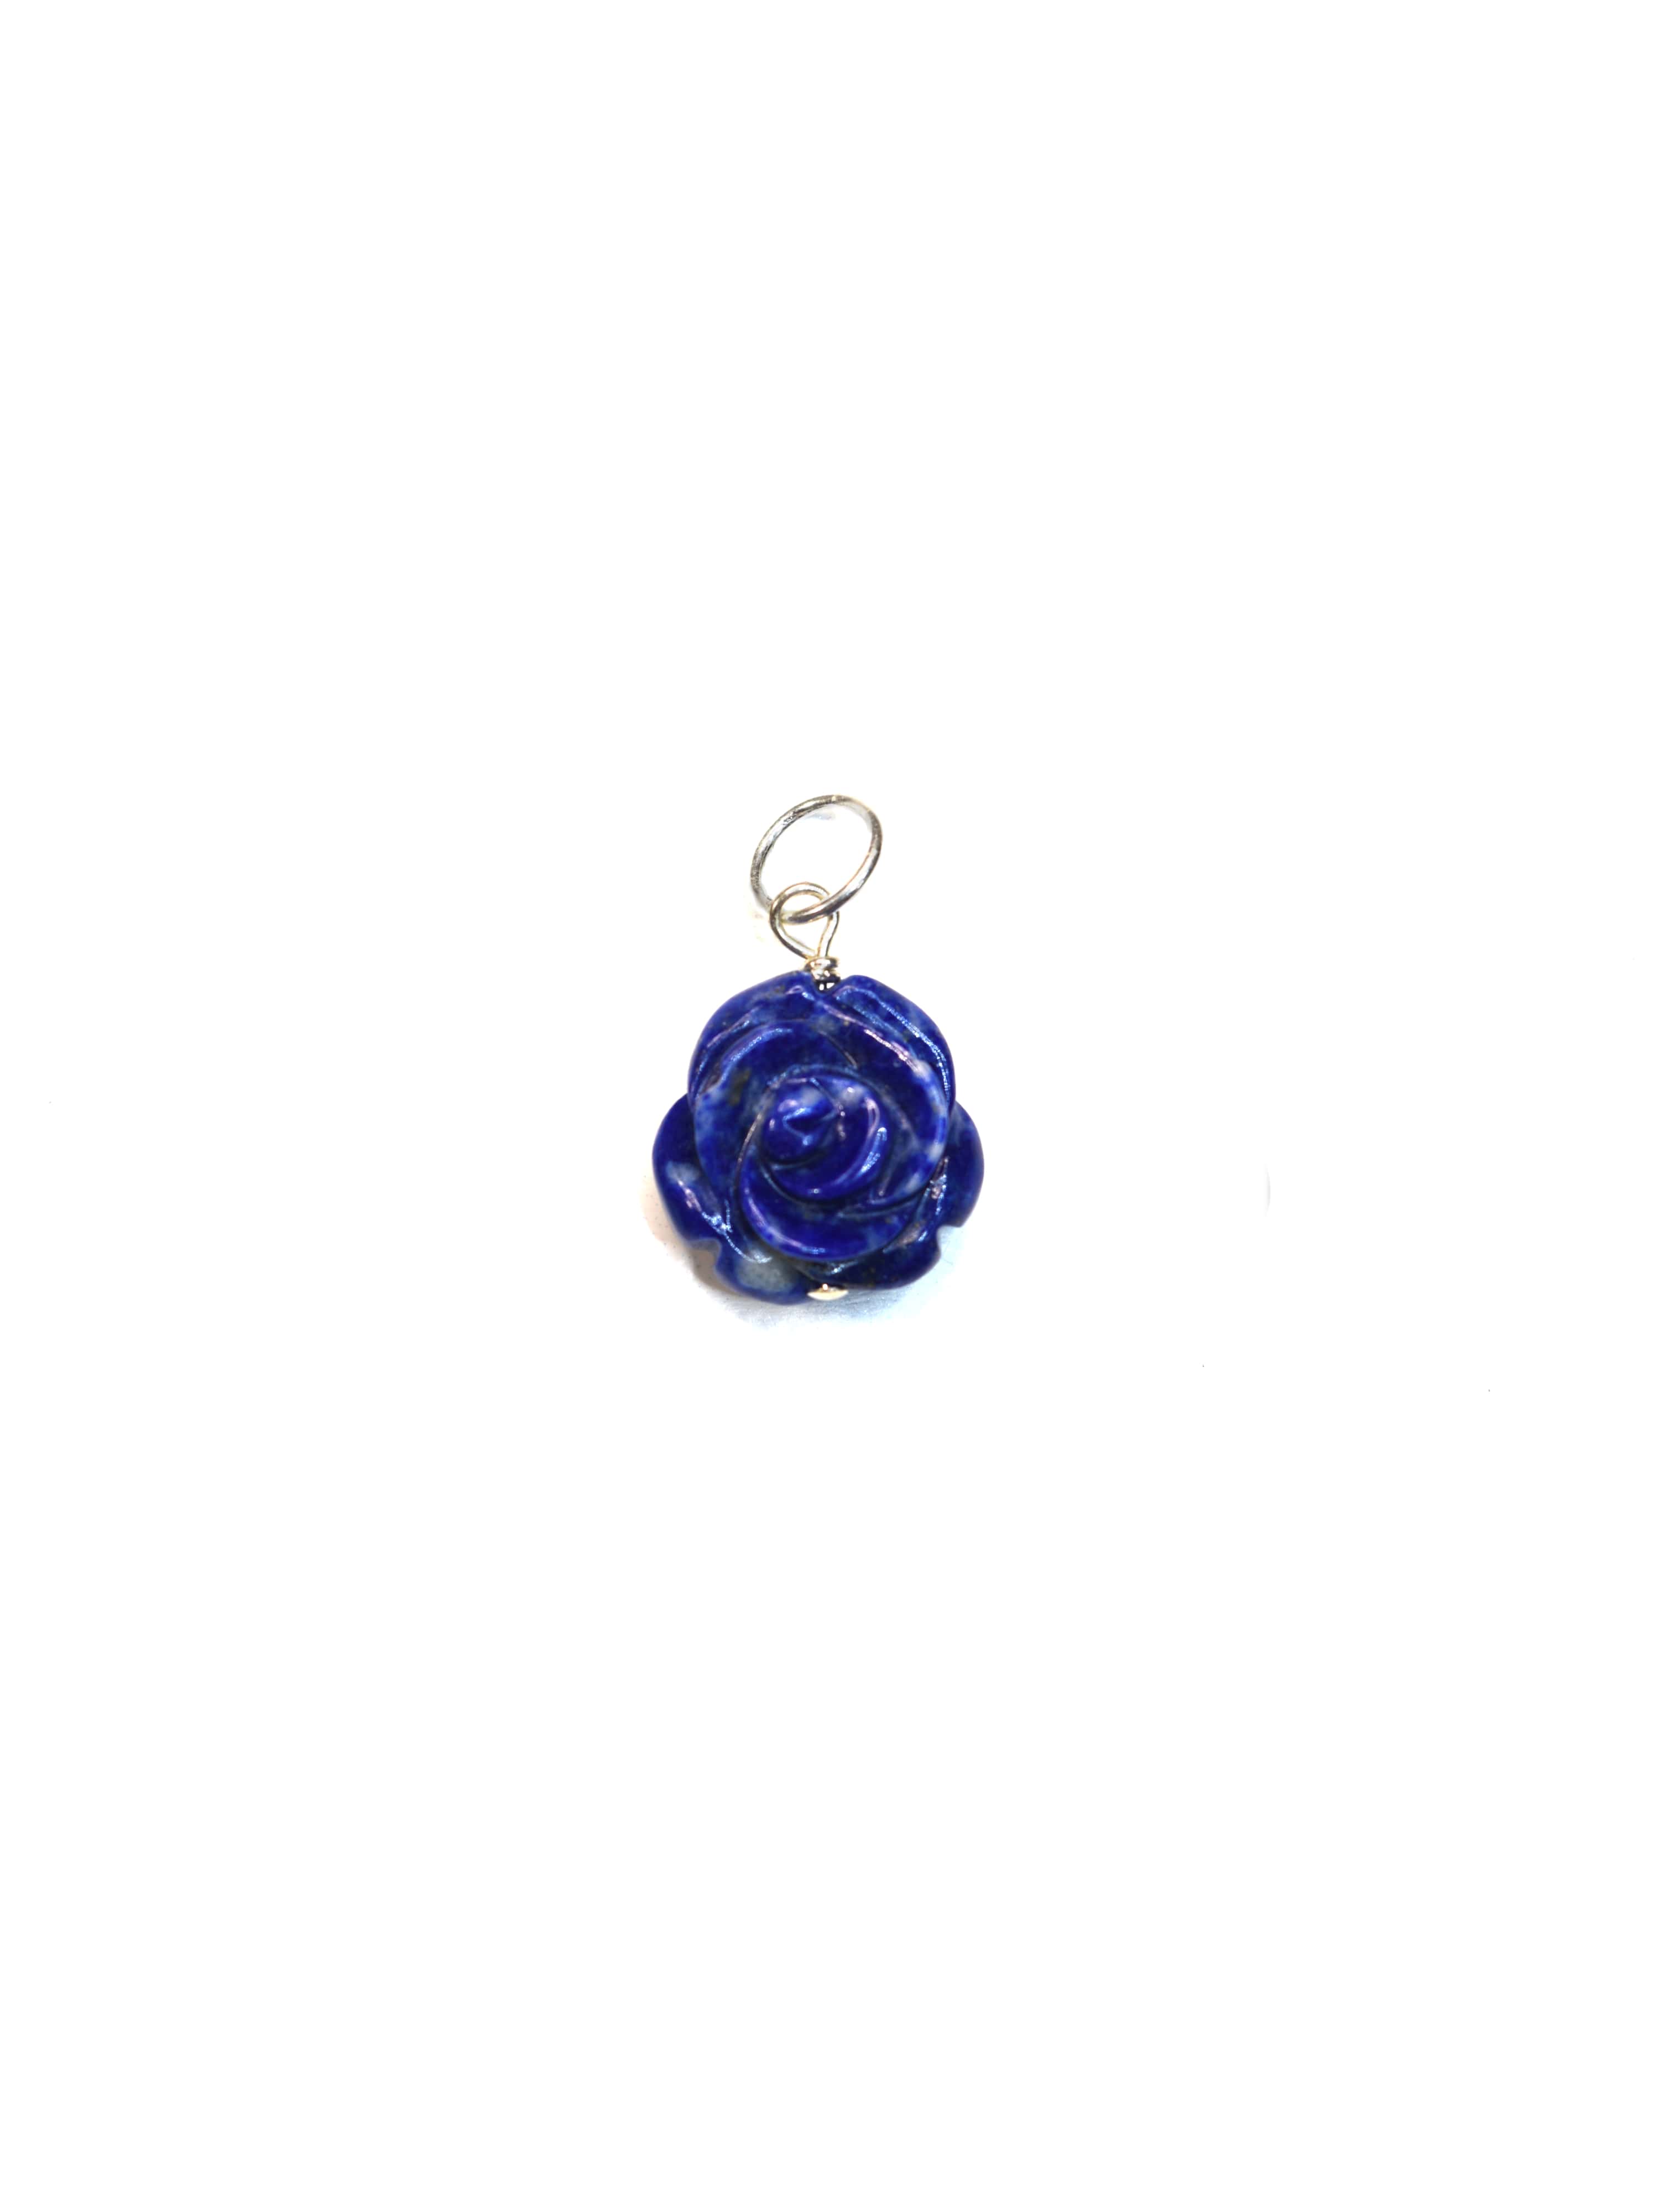 Carved Rose Charm in Lapis